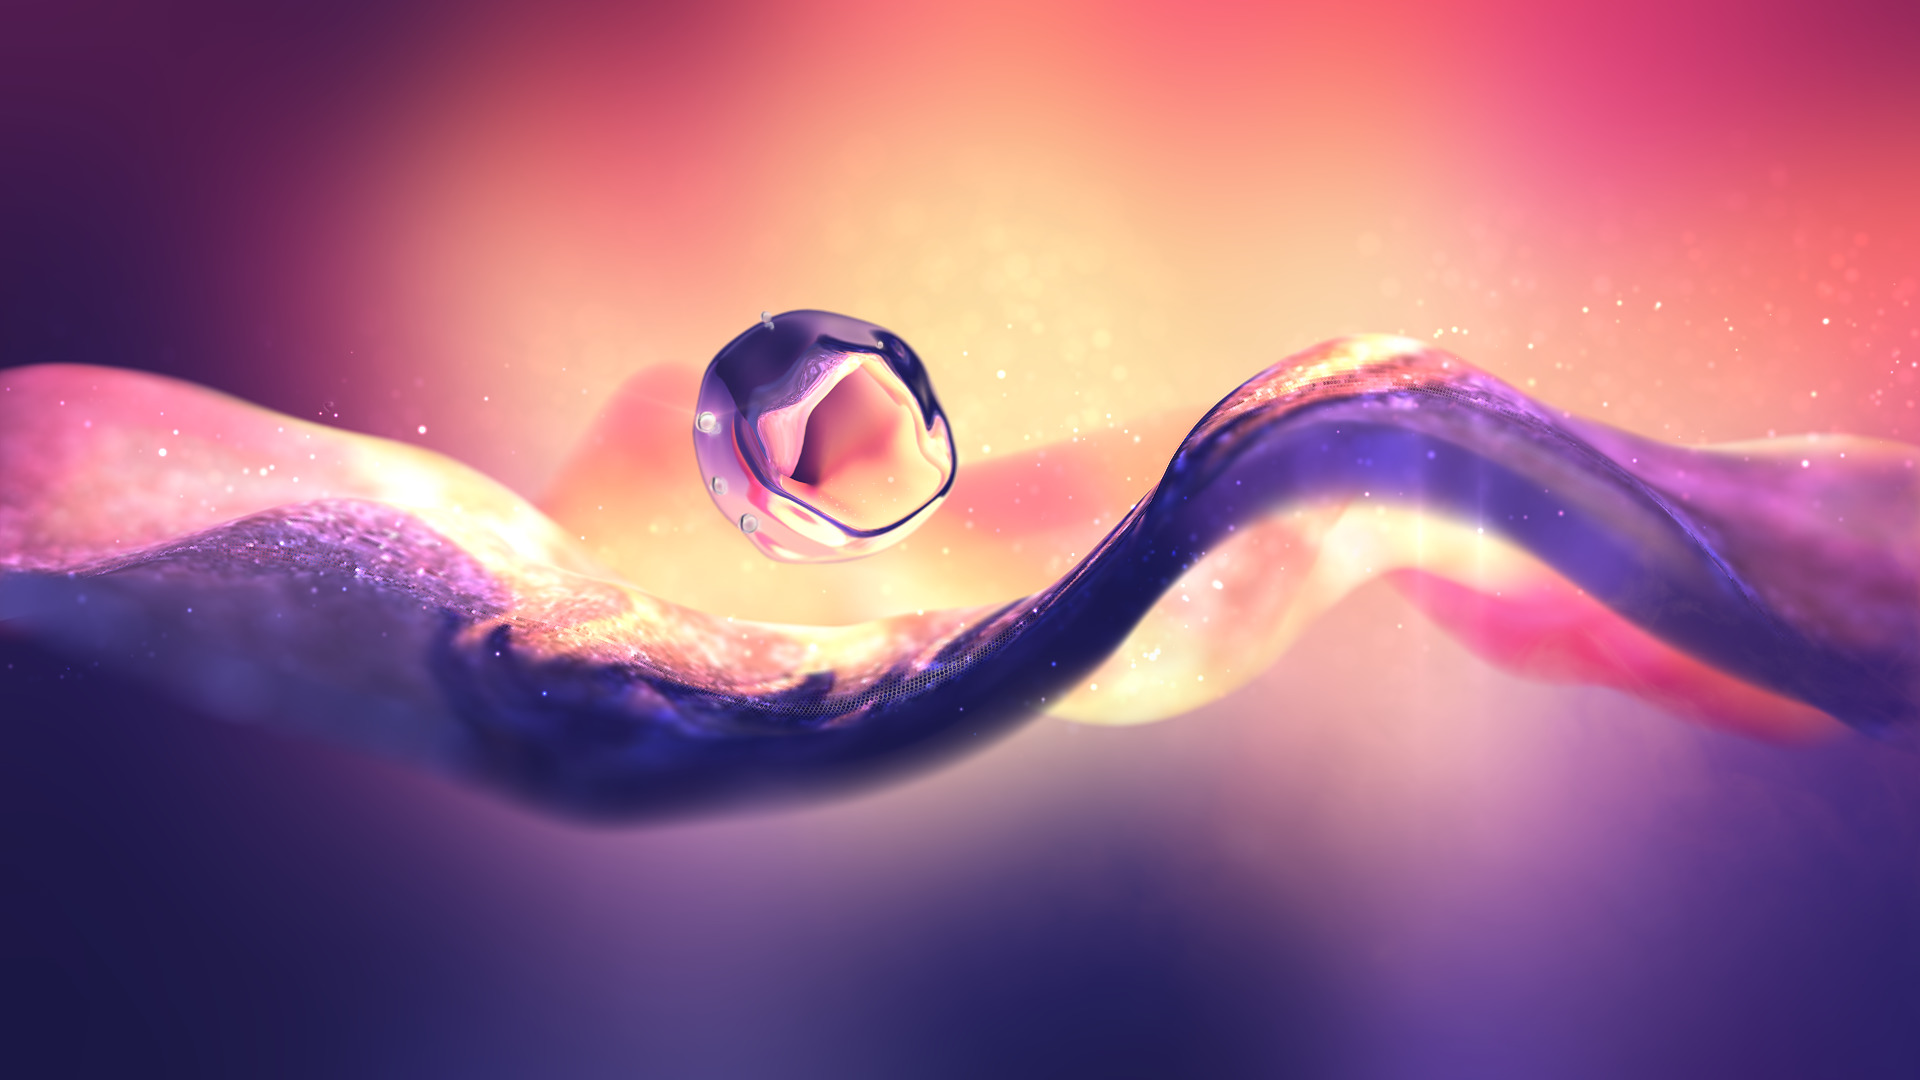 waveforms, CGI, Digital art, Colorful, Abstract, Depth of field, Flowers, Water drops Wallpaper